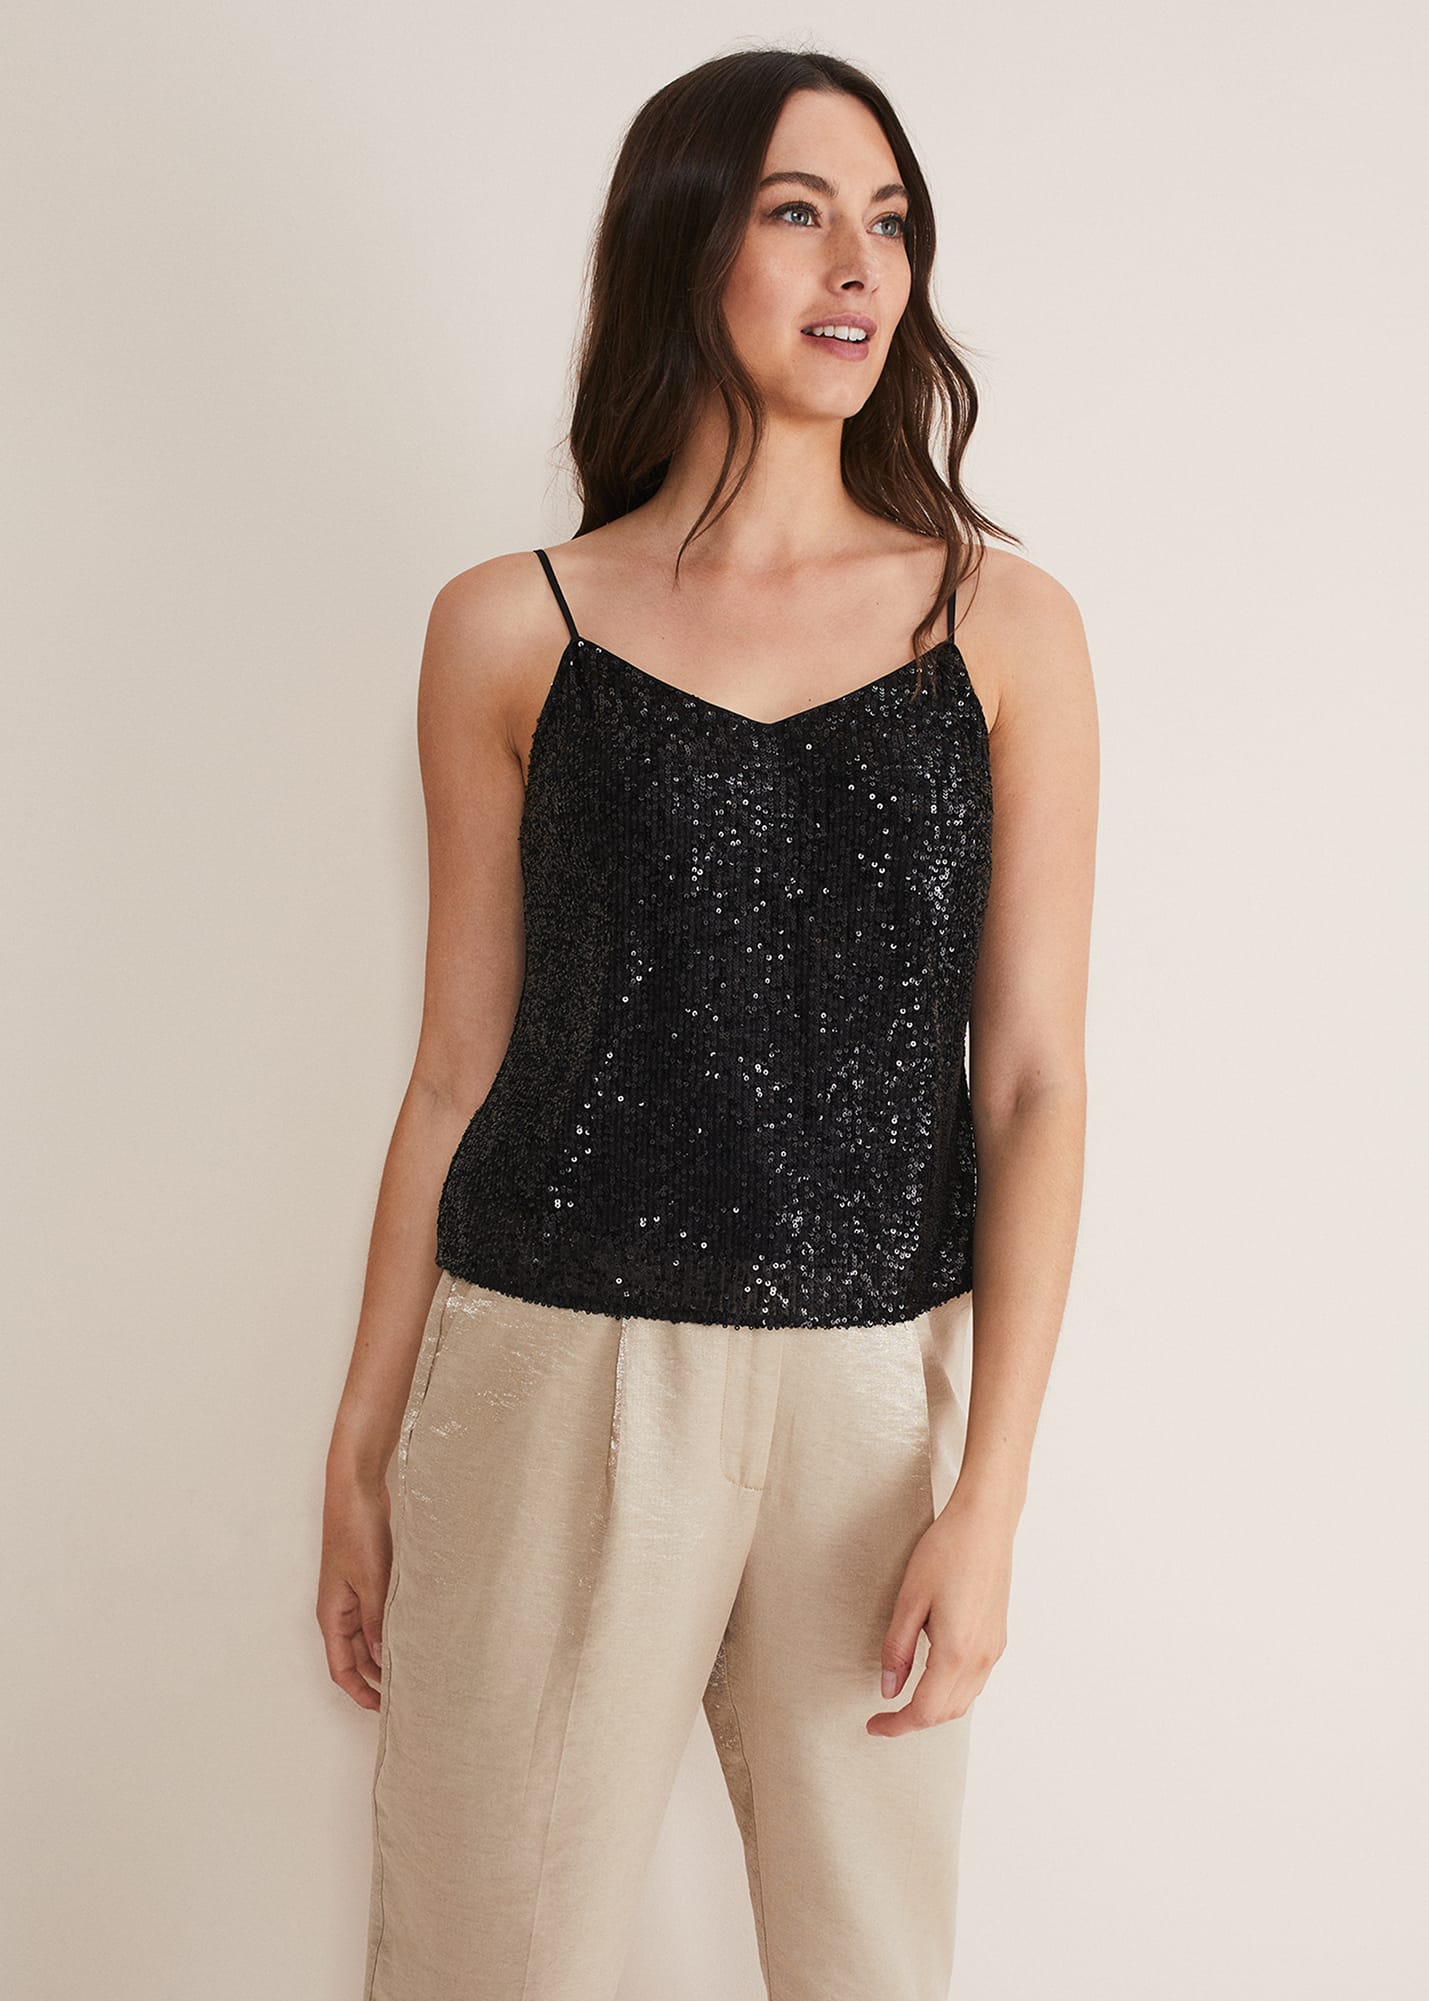 Phase Eight Women's Ivy Sequin Camisole